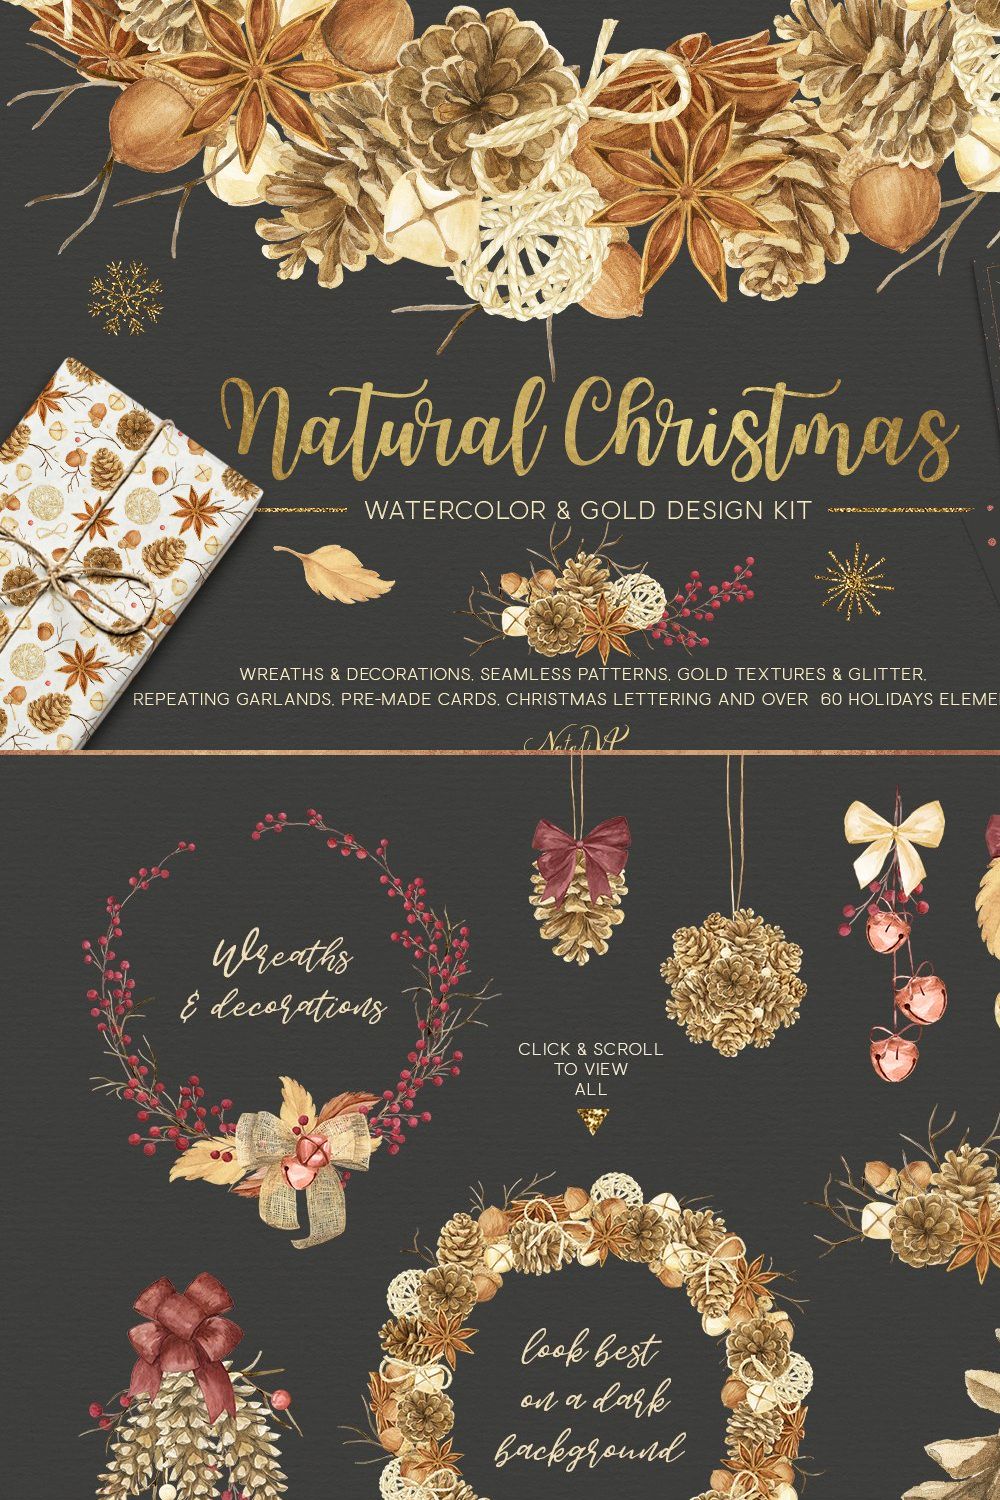 Natural Christmas. Watercolor & Gold pinterest preview image.